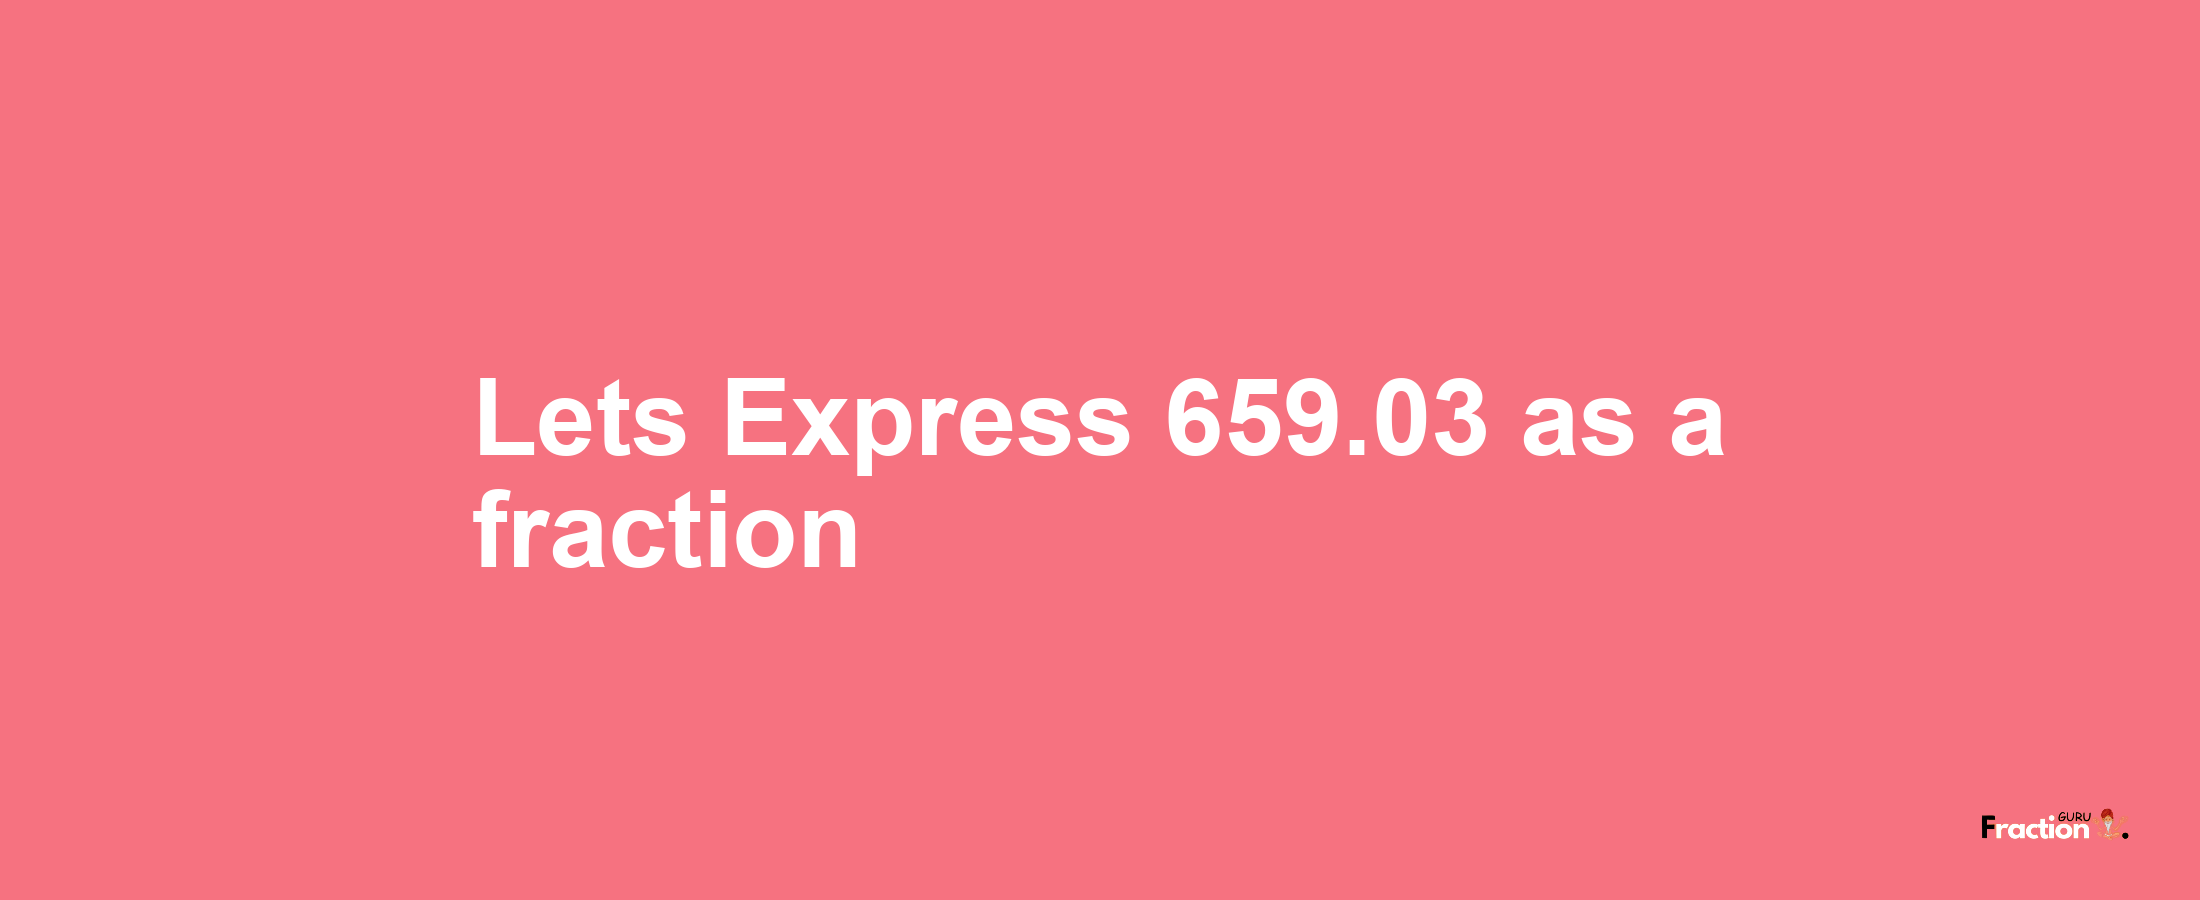 Lets Express 659.03 as afraction